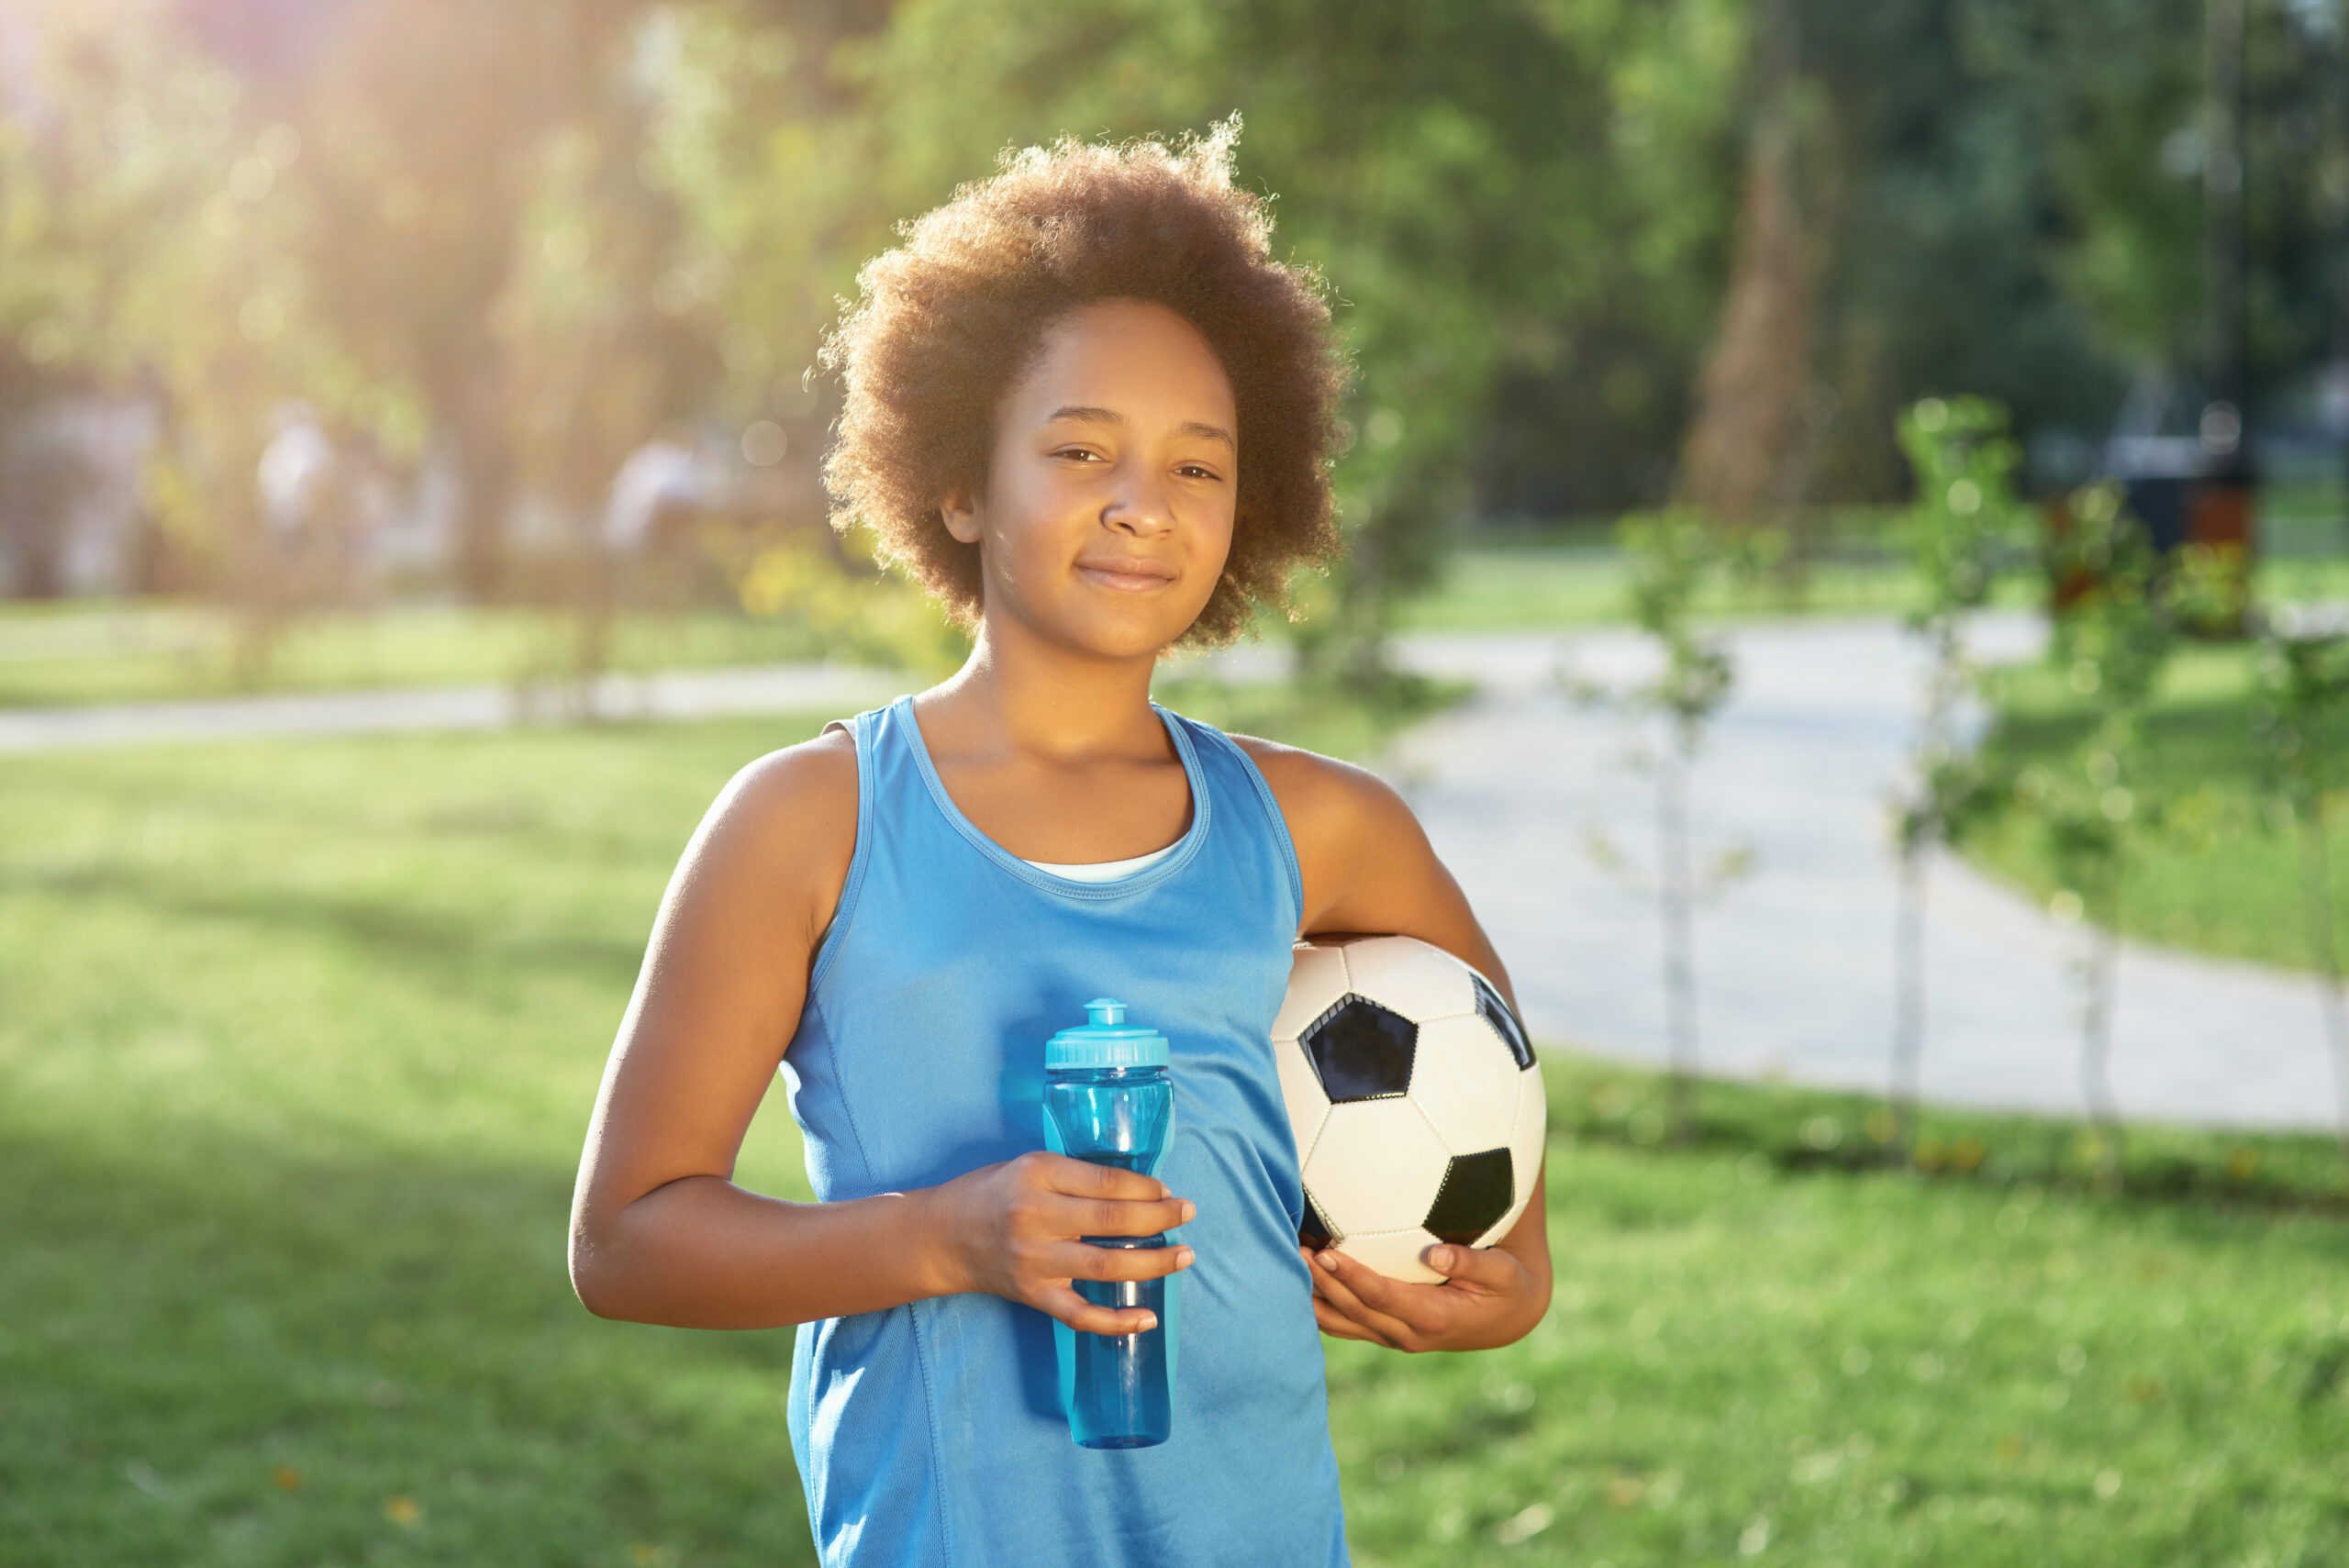 young african american female holding a water bottle and soccer ball, smiling at the camera against out of focus park background